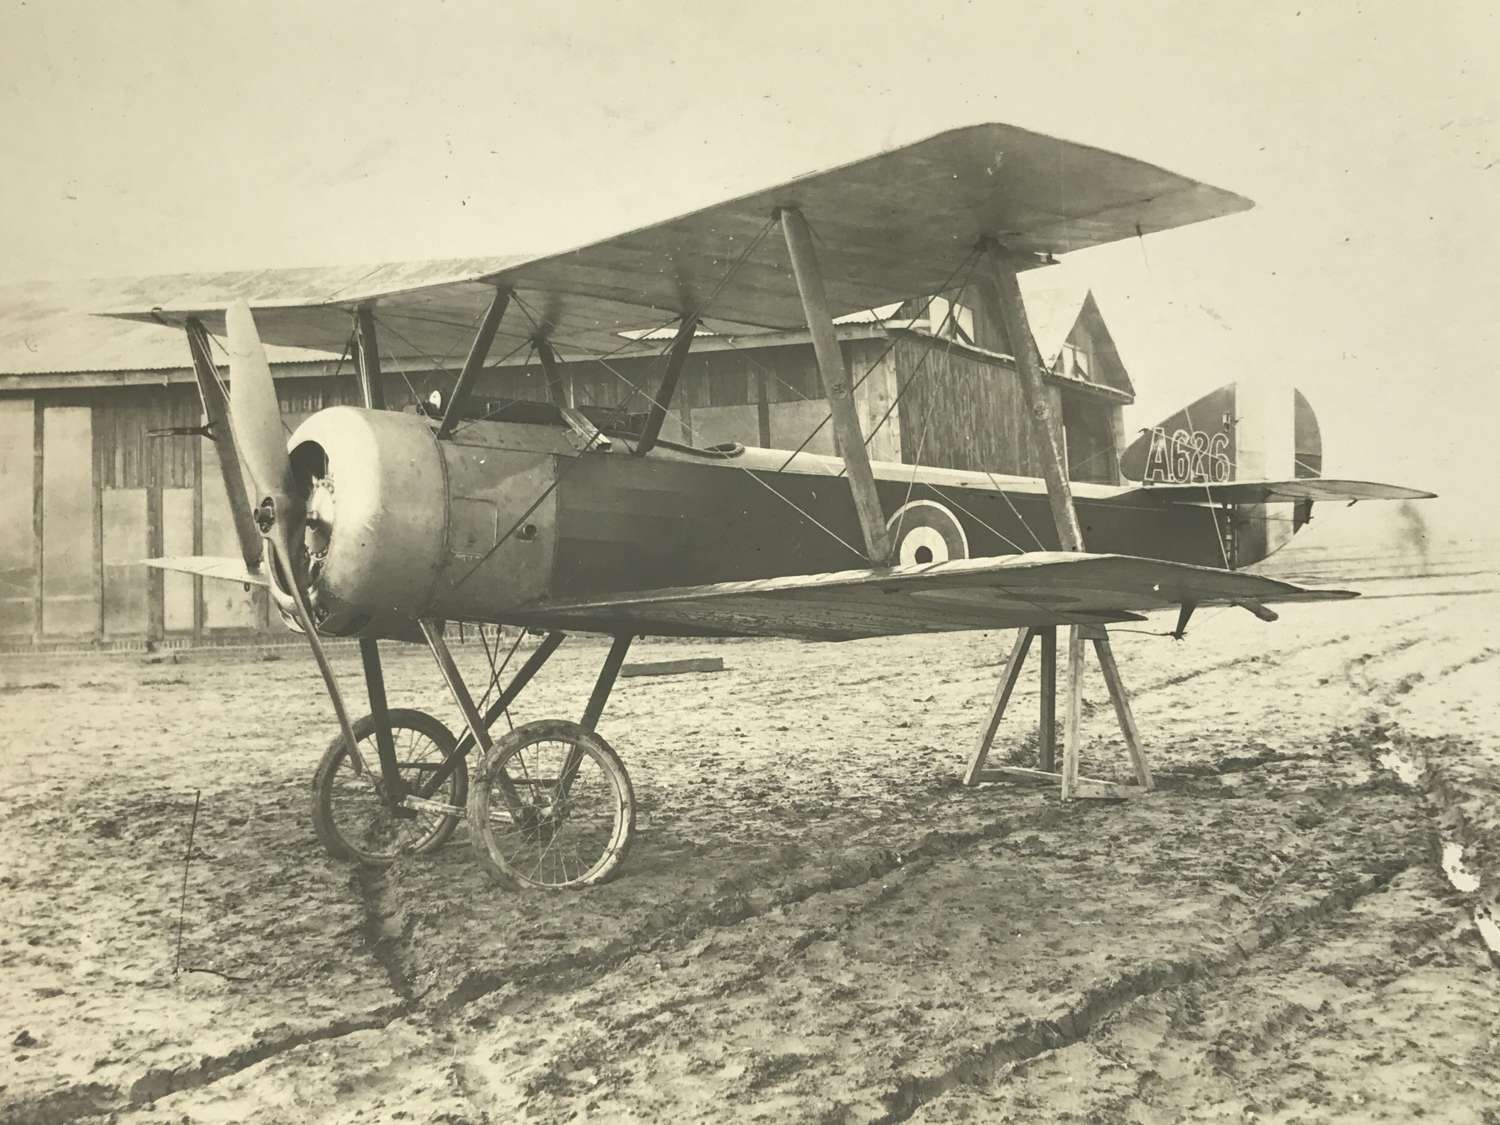 An image of a Sopwith Pup